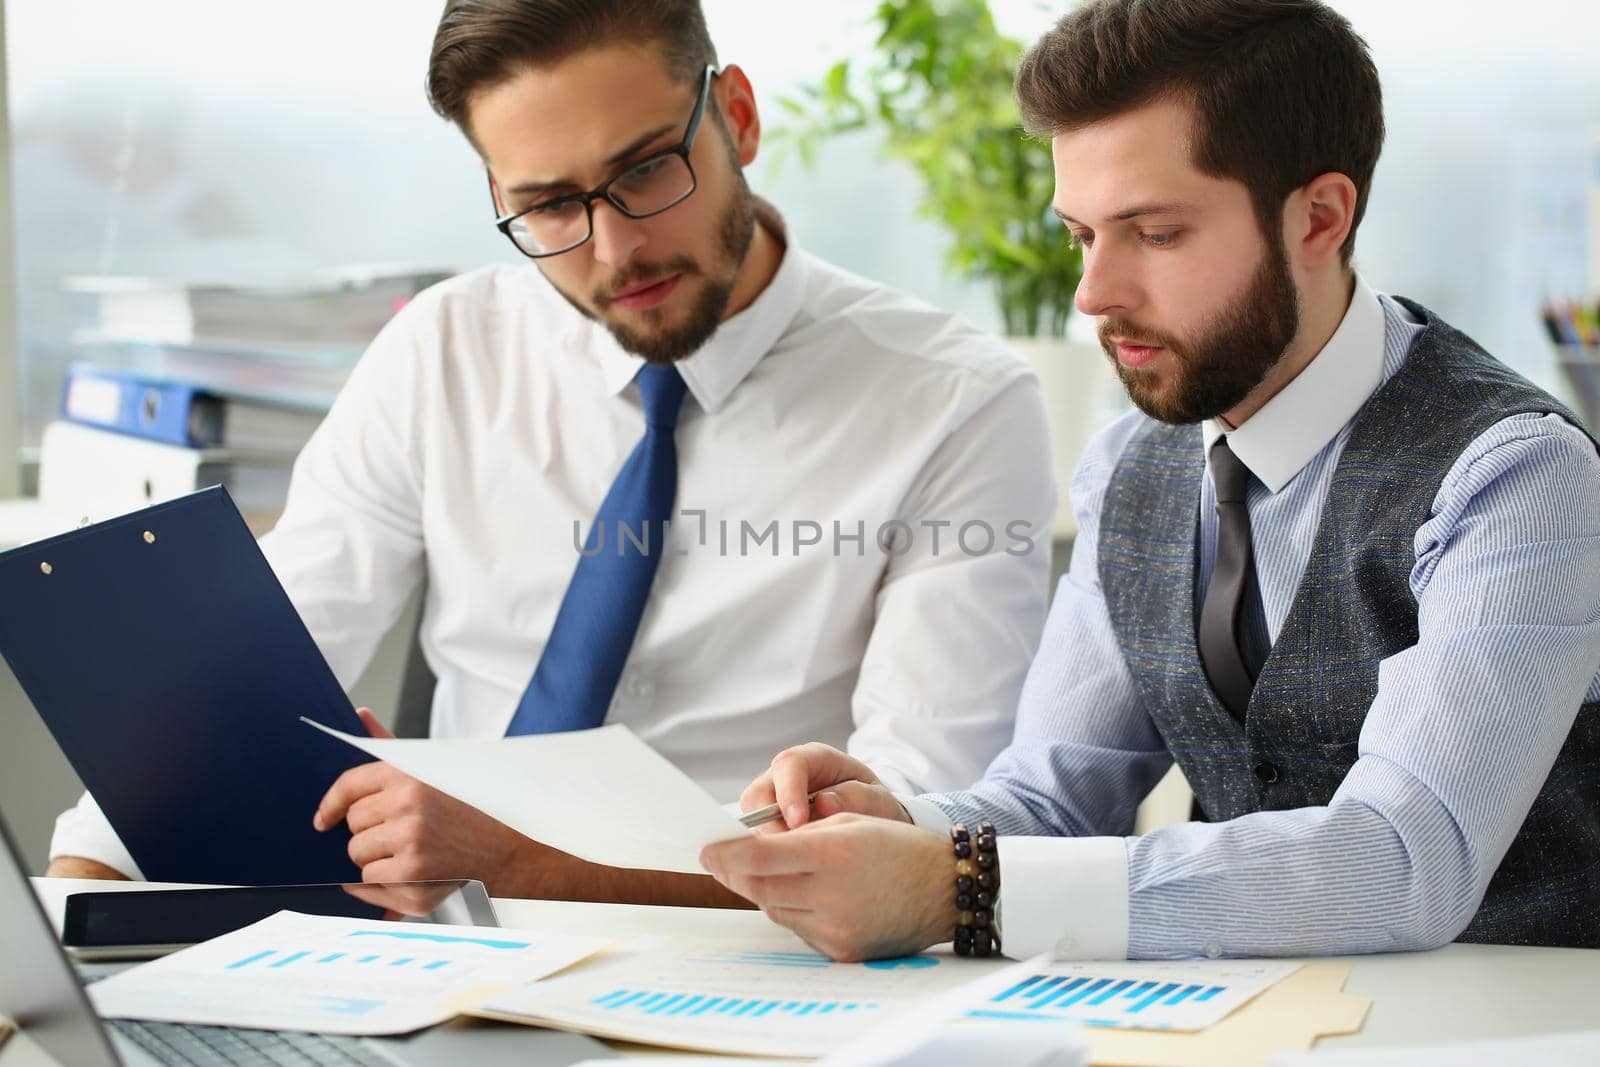 Portrait of coworkers men go through financial papers, solve and discuss problems. Fresh look on situation, new angle, white collar. Investment concept